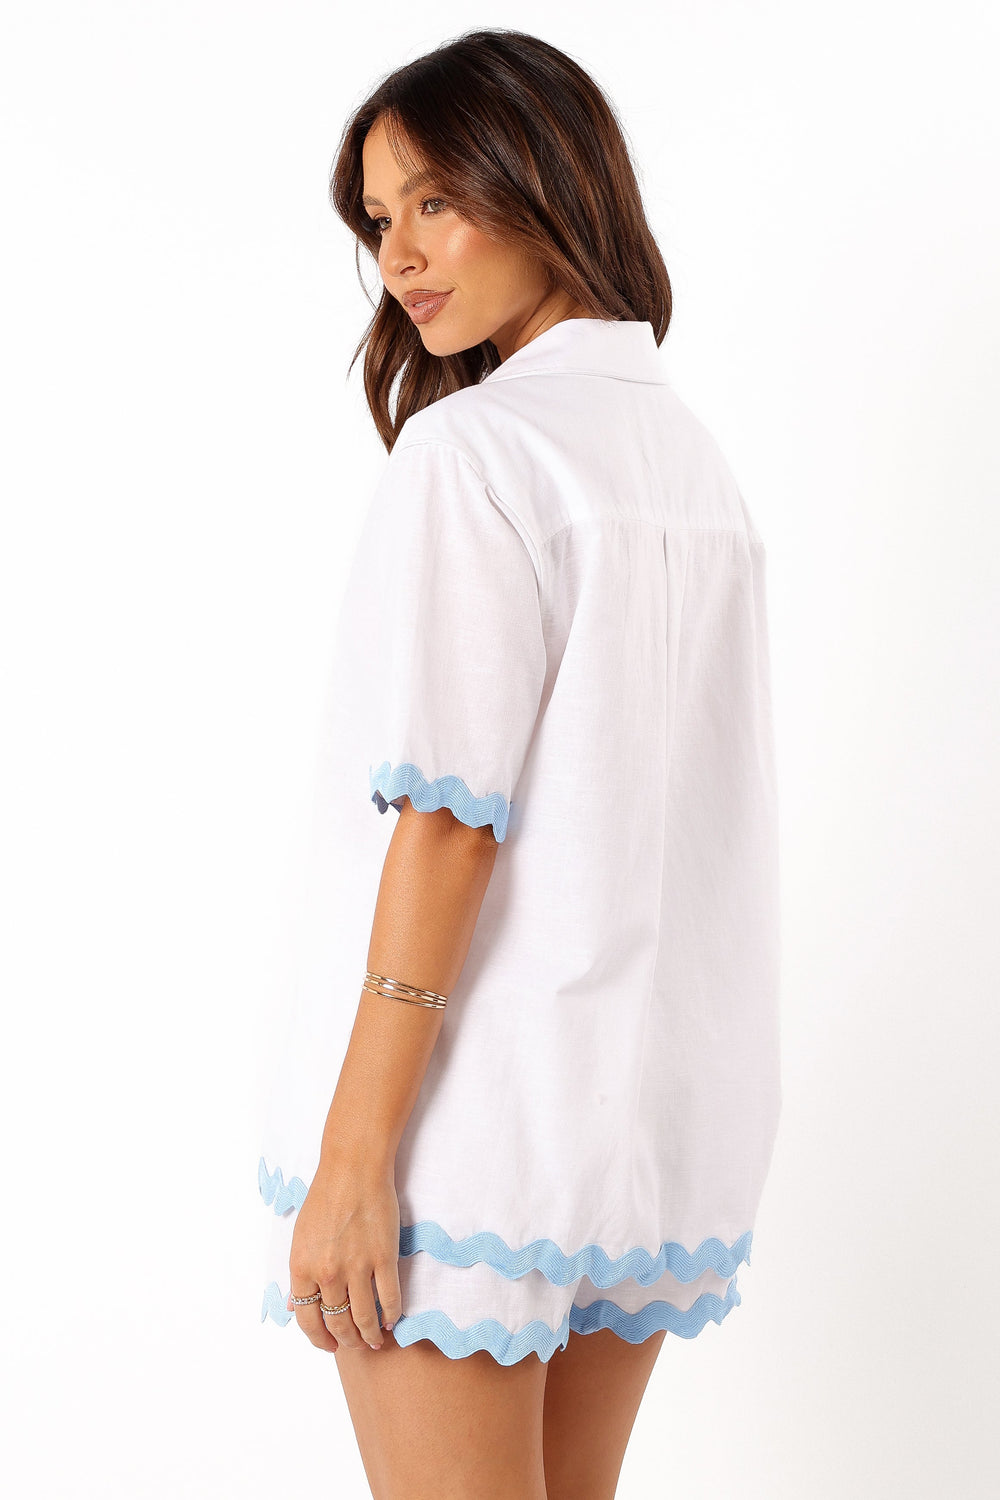 Petal and Pup USA TOPS Harry Shirt - White Blue